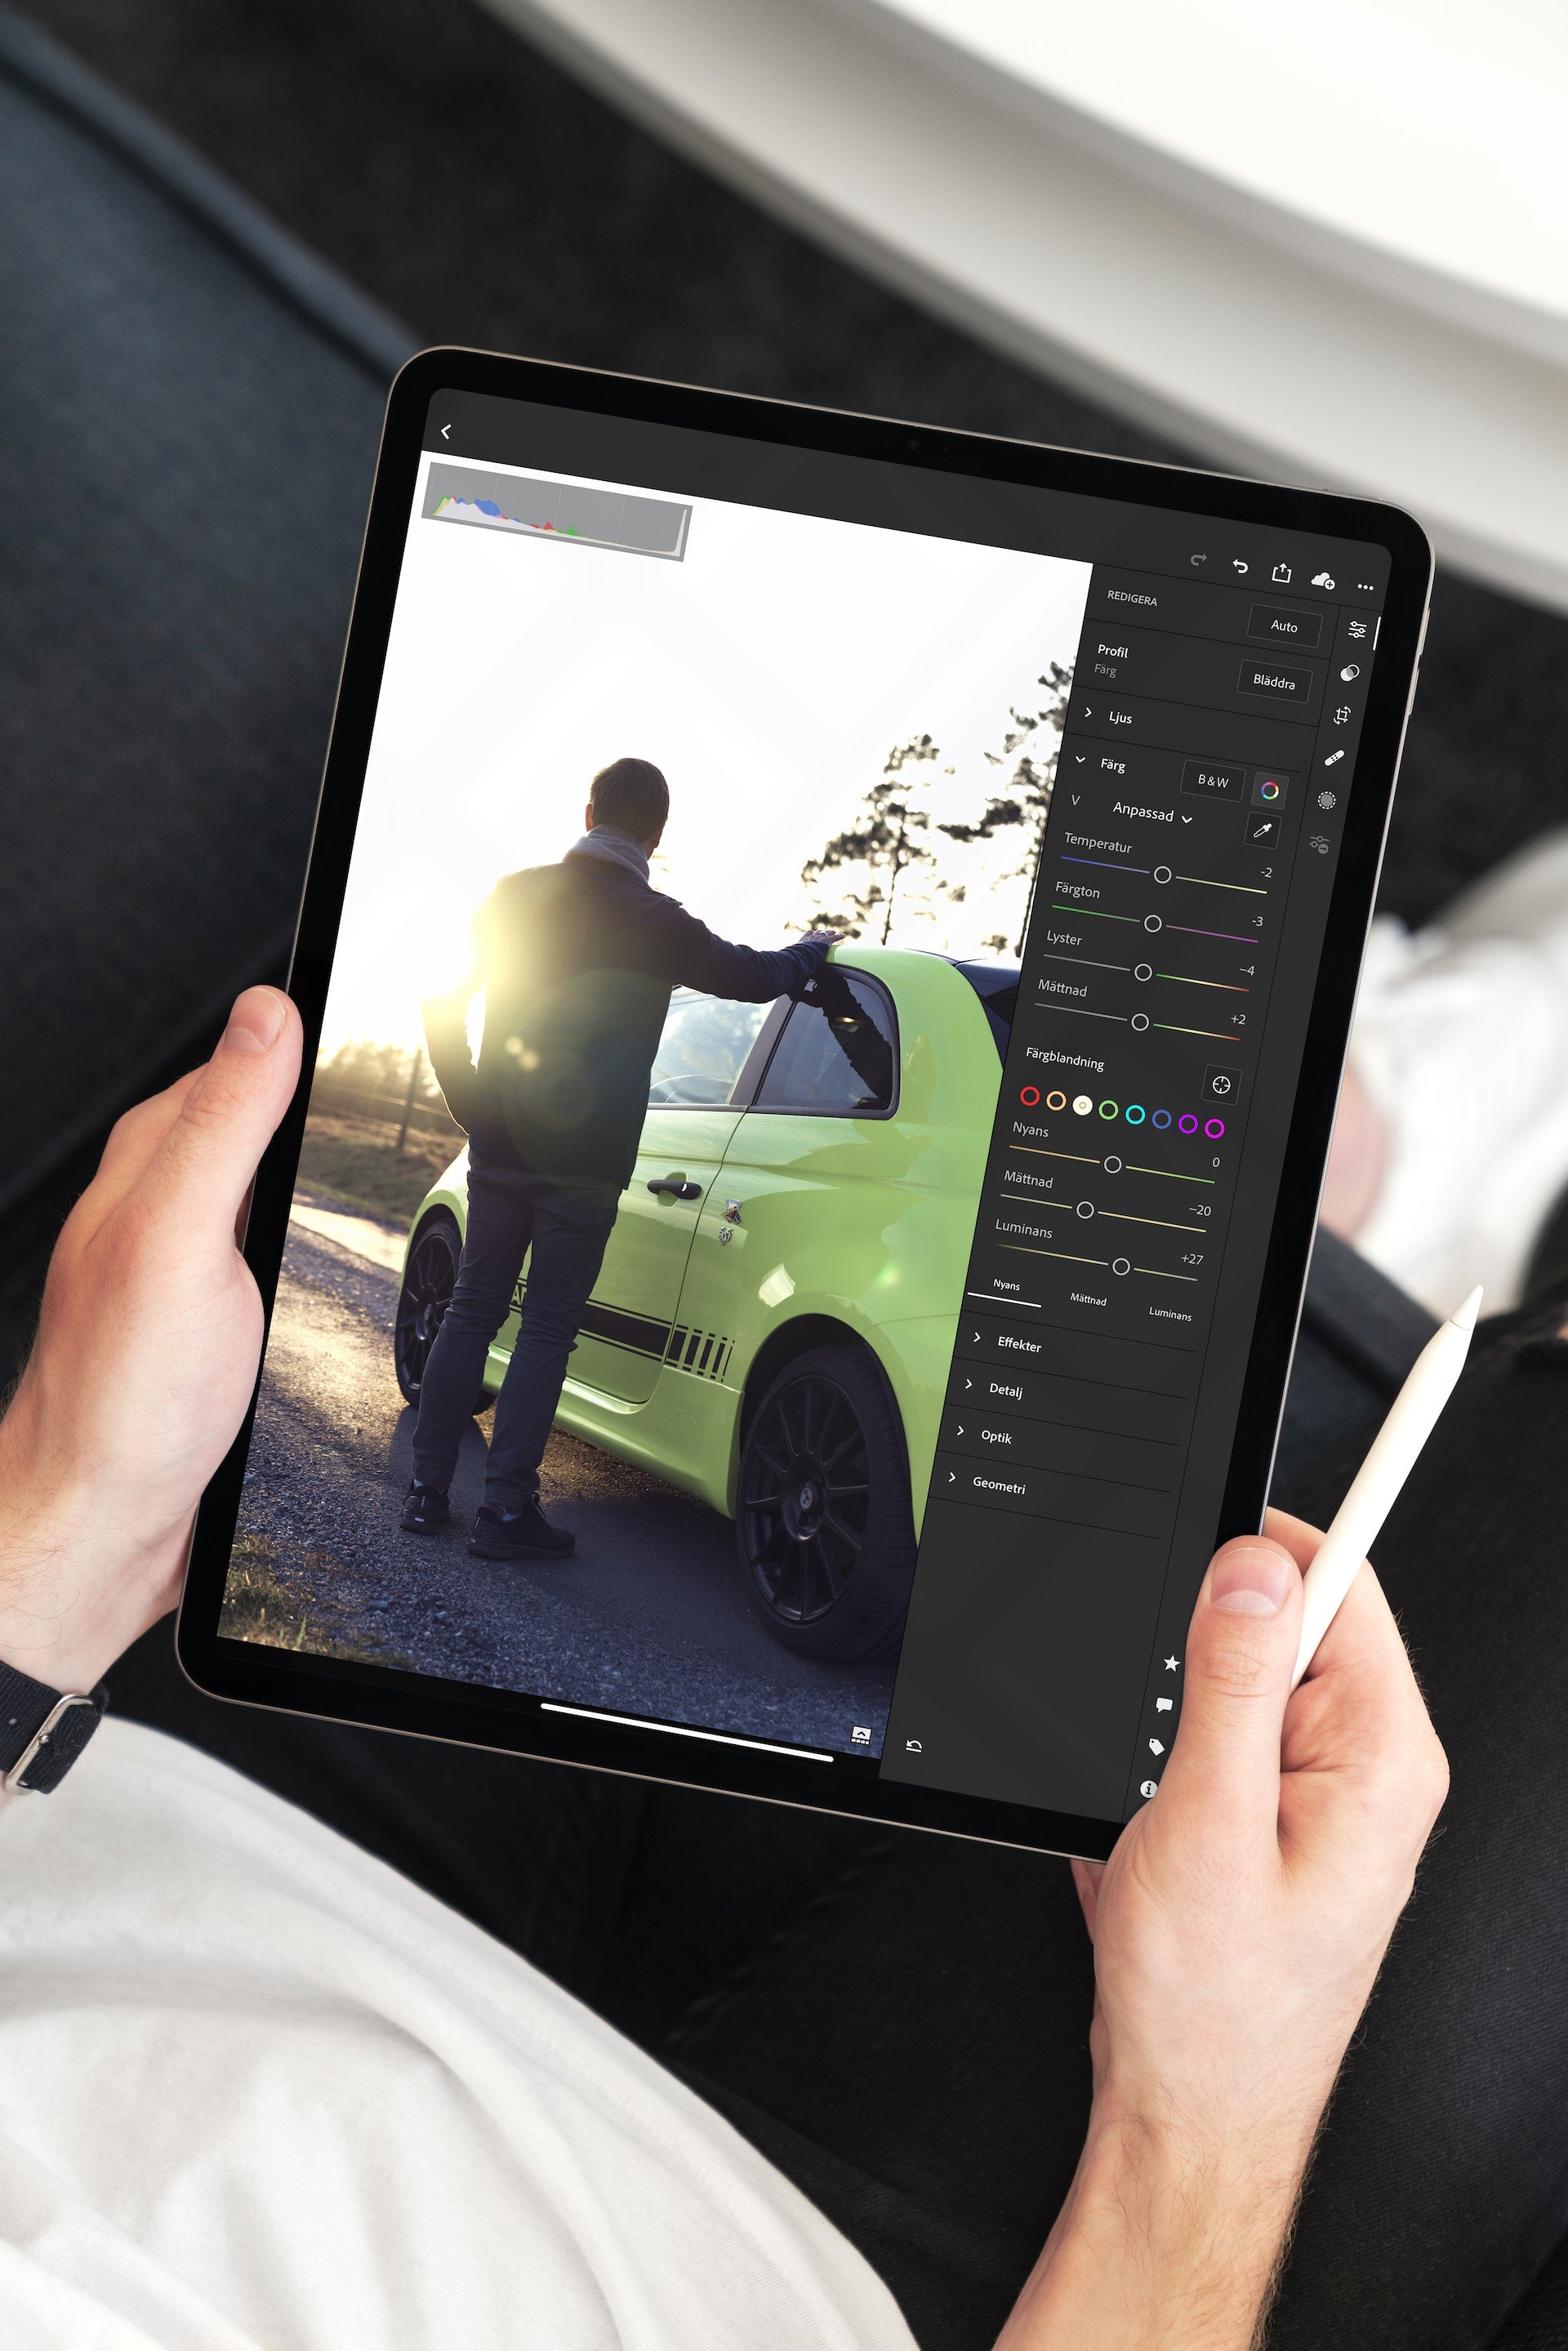 iPad Showing Photo Editing With Apple Pencil